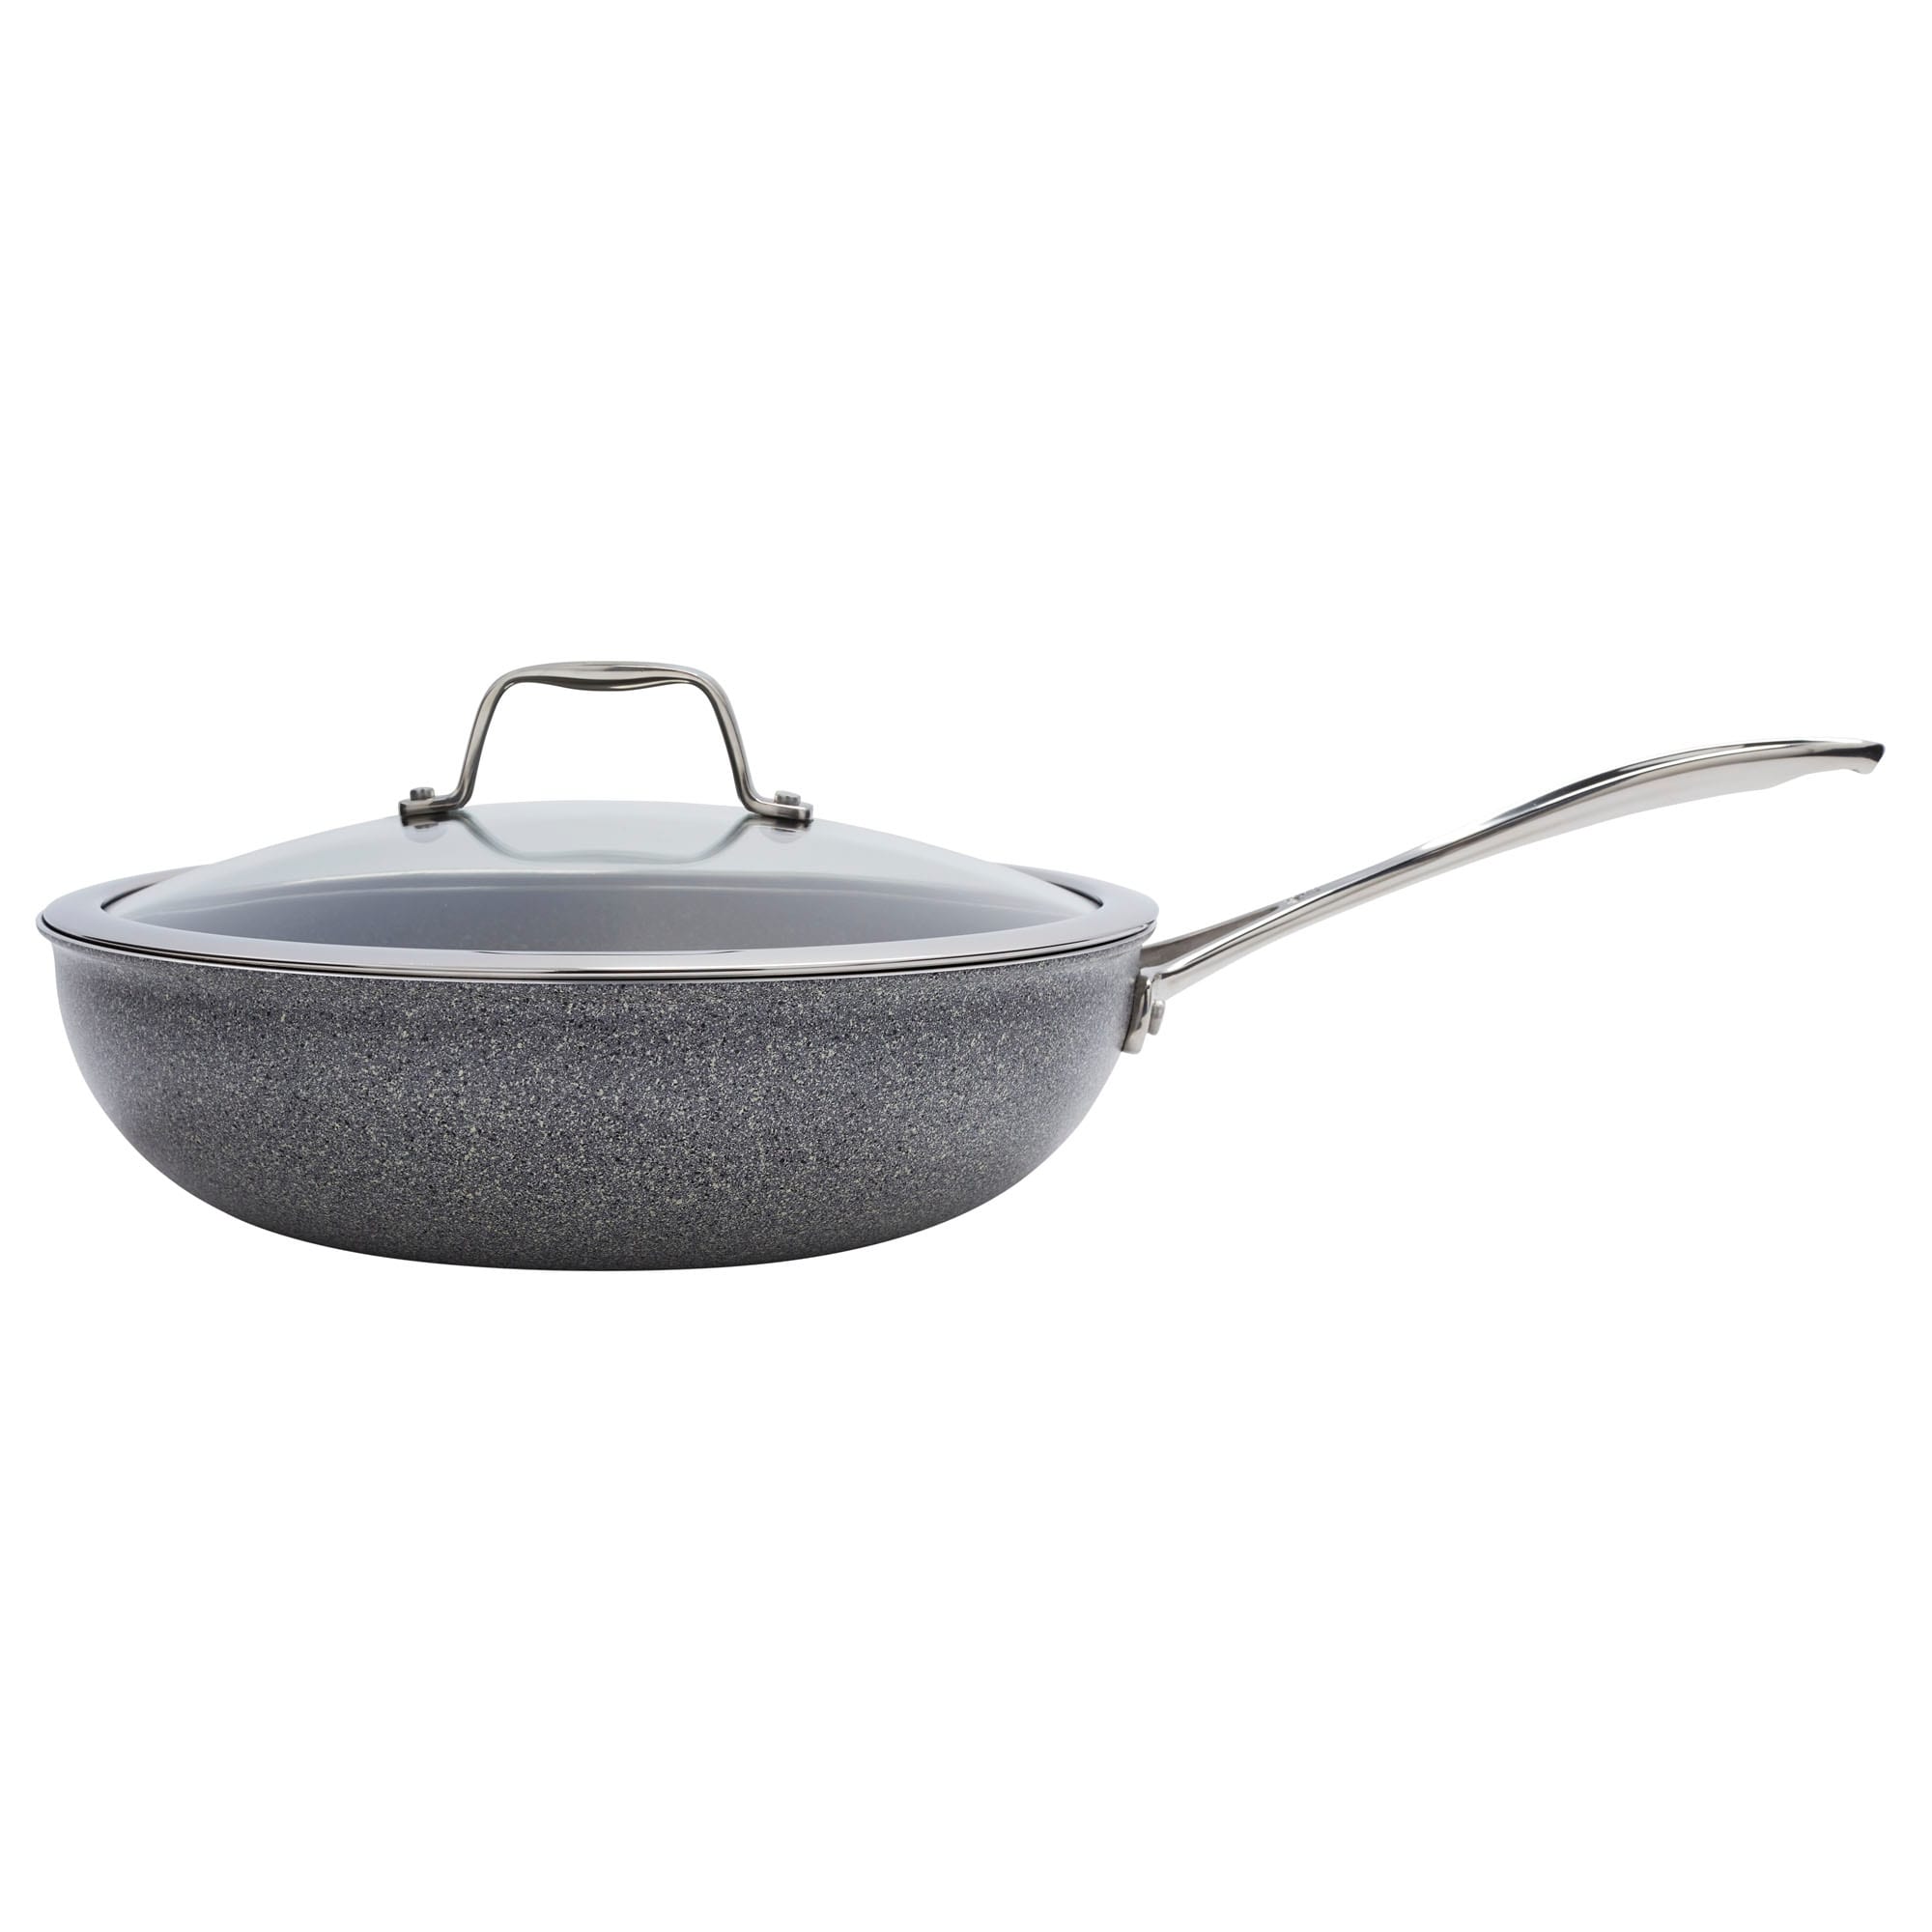 https://ak1.ostkcdn.com/images/products/is/images/direct/d7c8fe00aedbbdbc23cee5e95b834d85f28dc7af/Henckels-Capri-Granitium-11-inch-Aluminum-Nonstick-Perfect-Pan-with-Lid.jpg